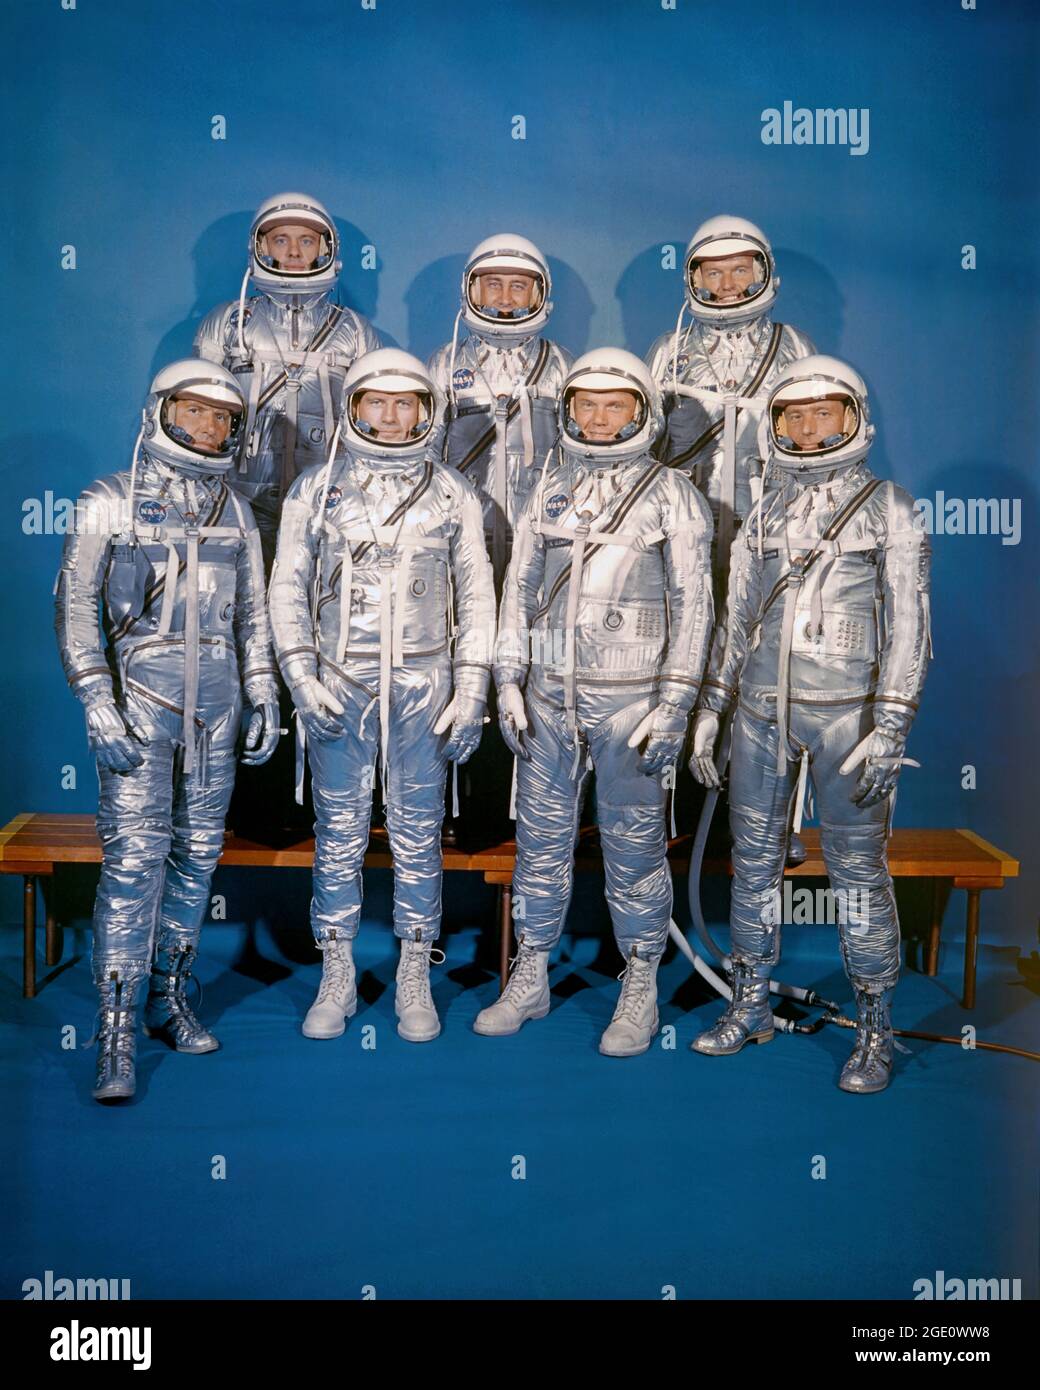 The Mercury 7 On April 9, 1959, NASA introduced its first astronaut class, the Mercury 7. This image was taken by LIFE magazine photographer Ralph Morse on March 17, 1960, in the Atmospheric Wind Tunnel building at Langley Research Center. Front row, left to right: Walter M. Schirra, Jr., Donald K. 'Deke' Slayton, John H. Glenn, Jr., and M. Scott Carpenter; back row, Alan B. Shepard, Jr., Virgil I. 'Gus' Grissom, and L. Gordon Cooper, Jr. Stock Photo